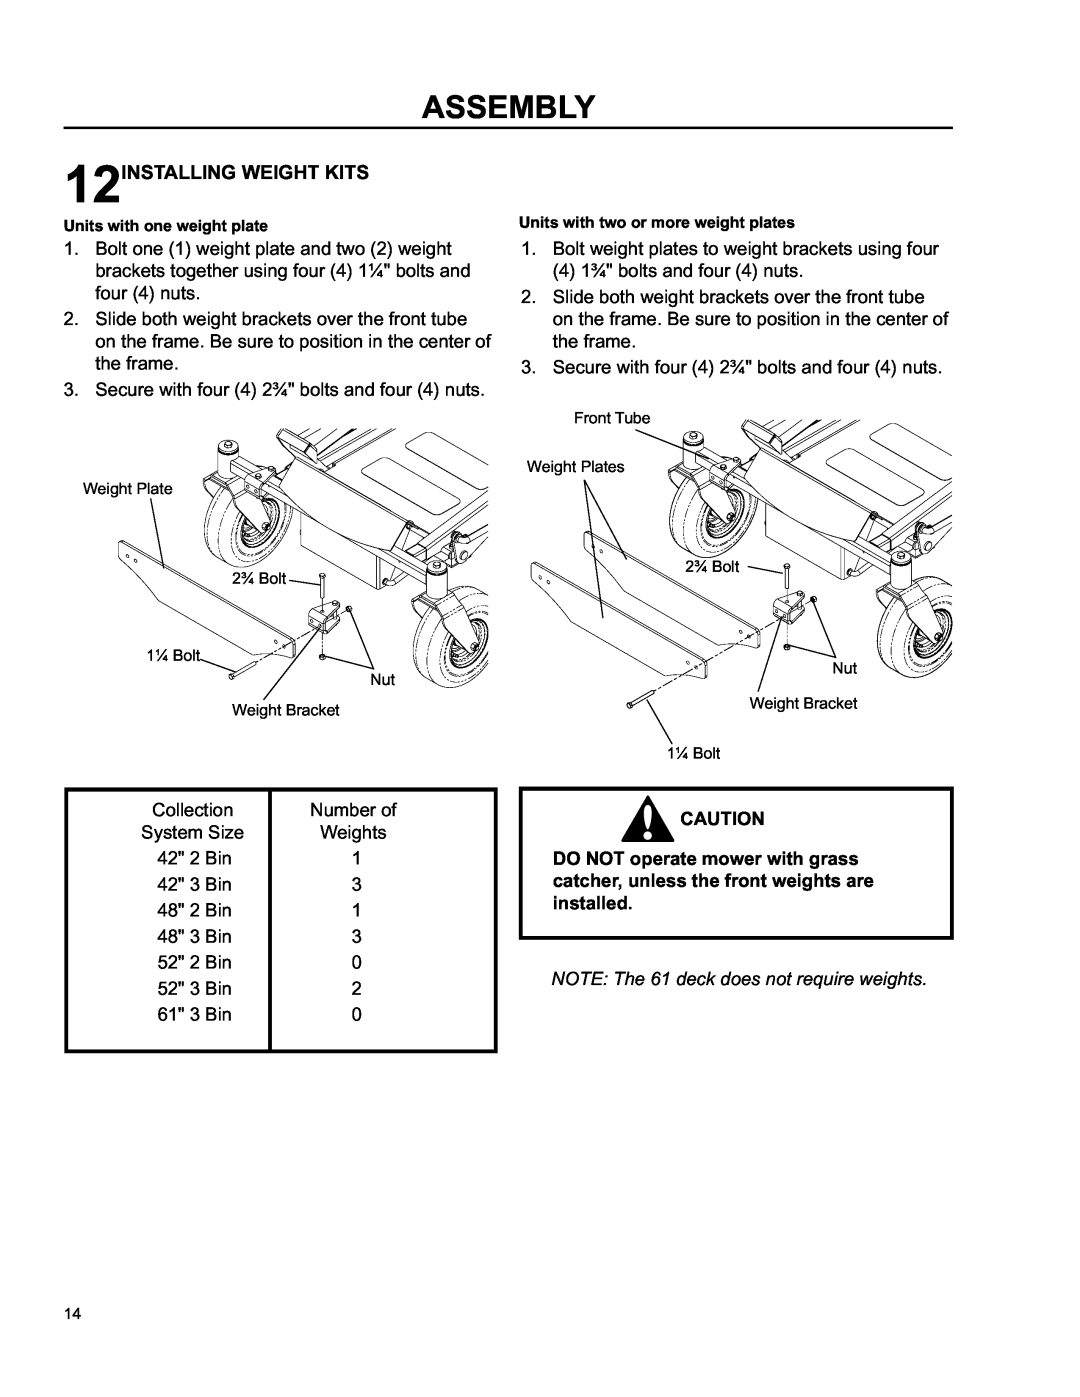 Husqvarna O0803001 manual 12INSTALLING WEIGHT KITS, NOTE The 61 deck does not require weights, Assembly 